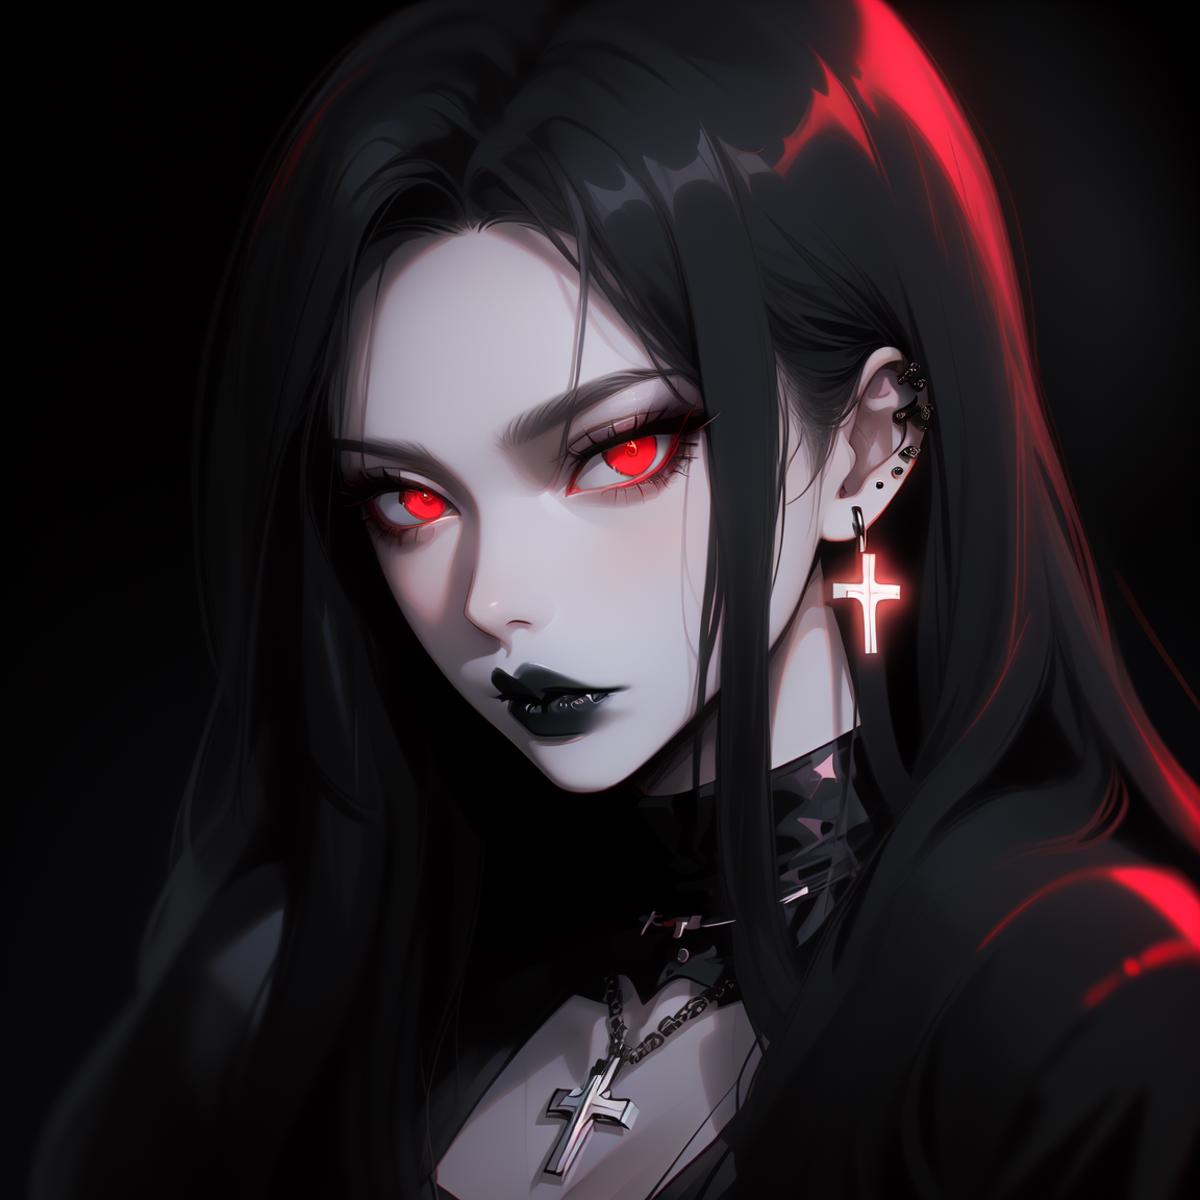 A darkly colored, anime-style woman with a cross earring and red eyes staring straight ahead.